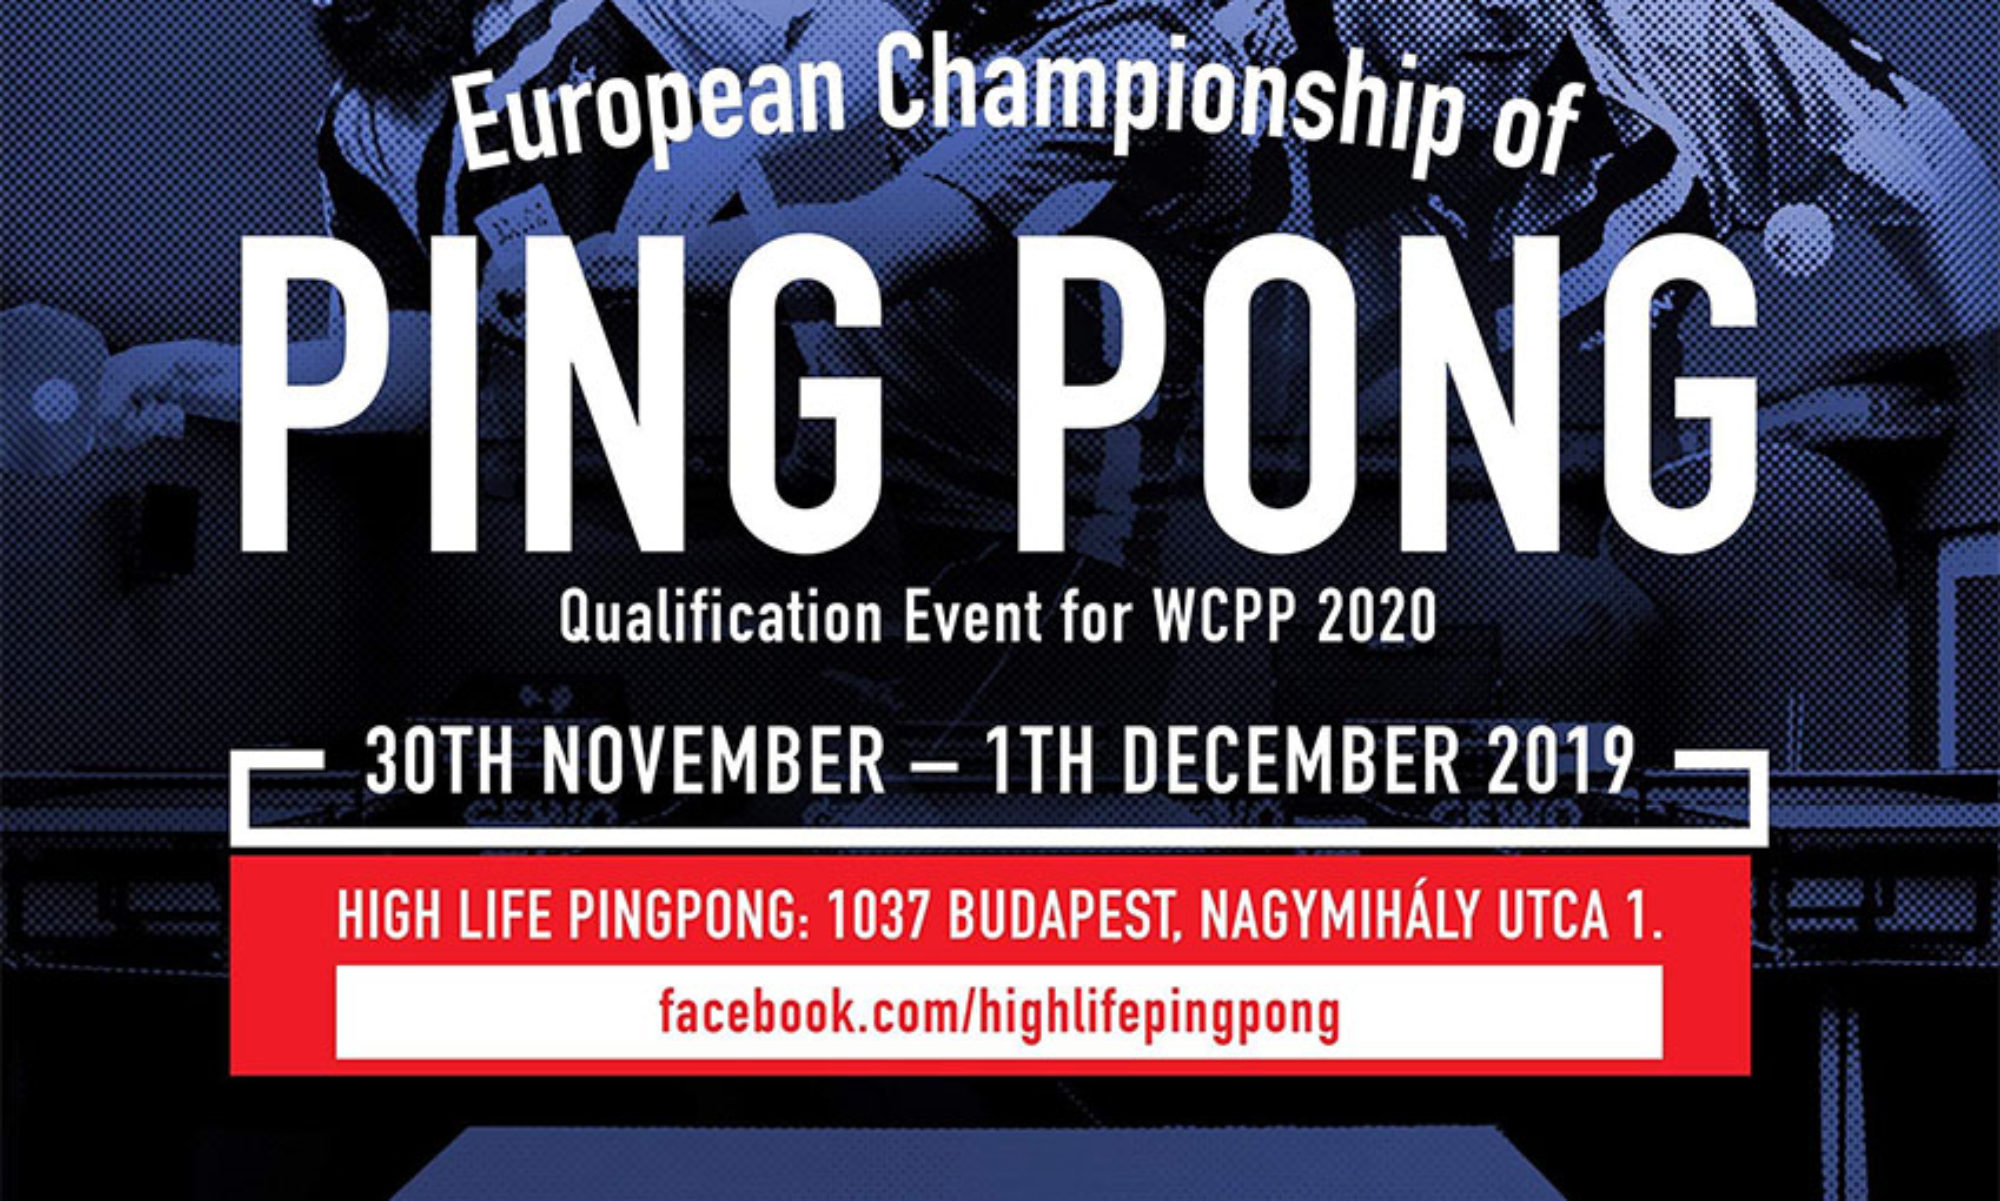 Qualification Event For WCPP 2020